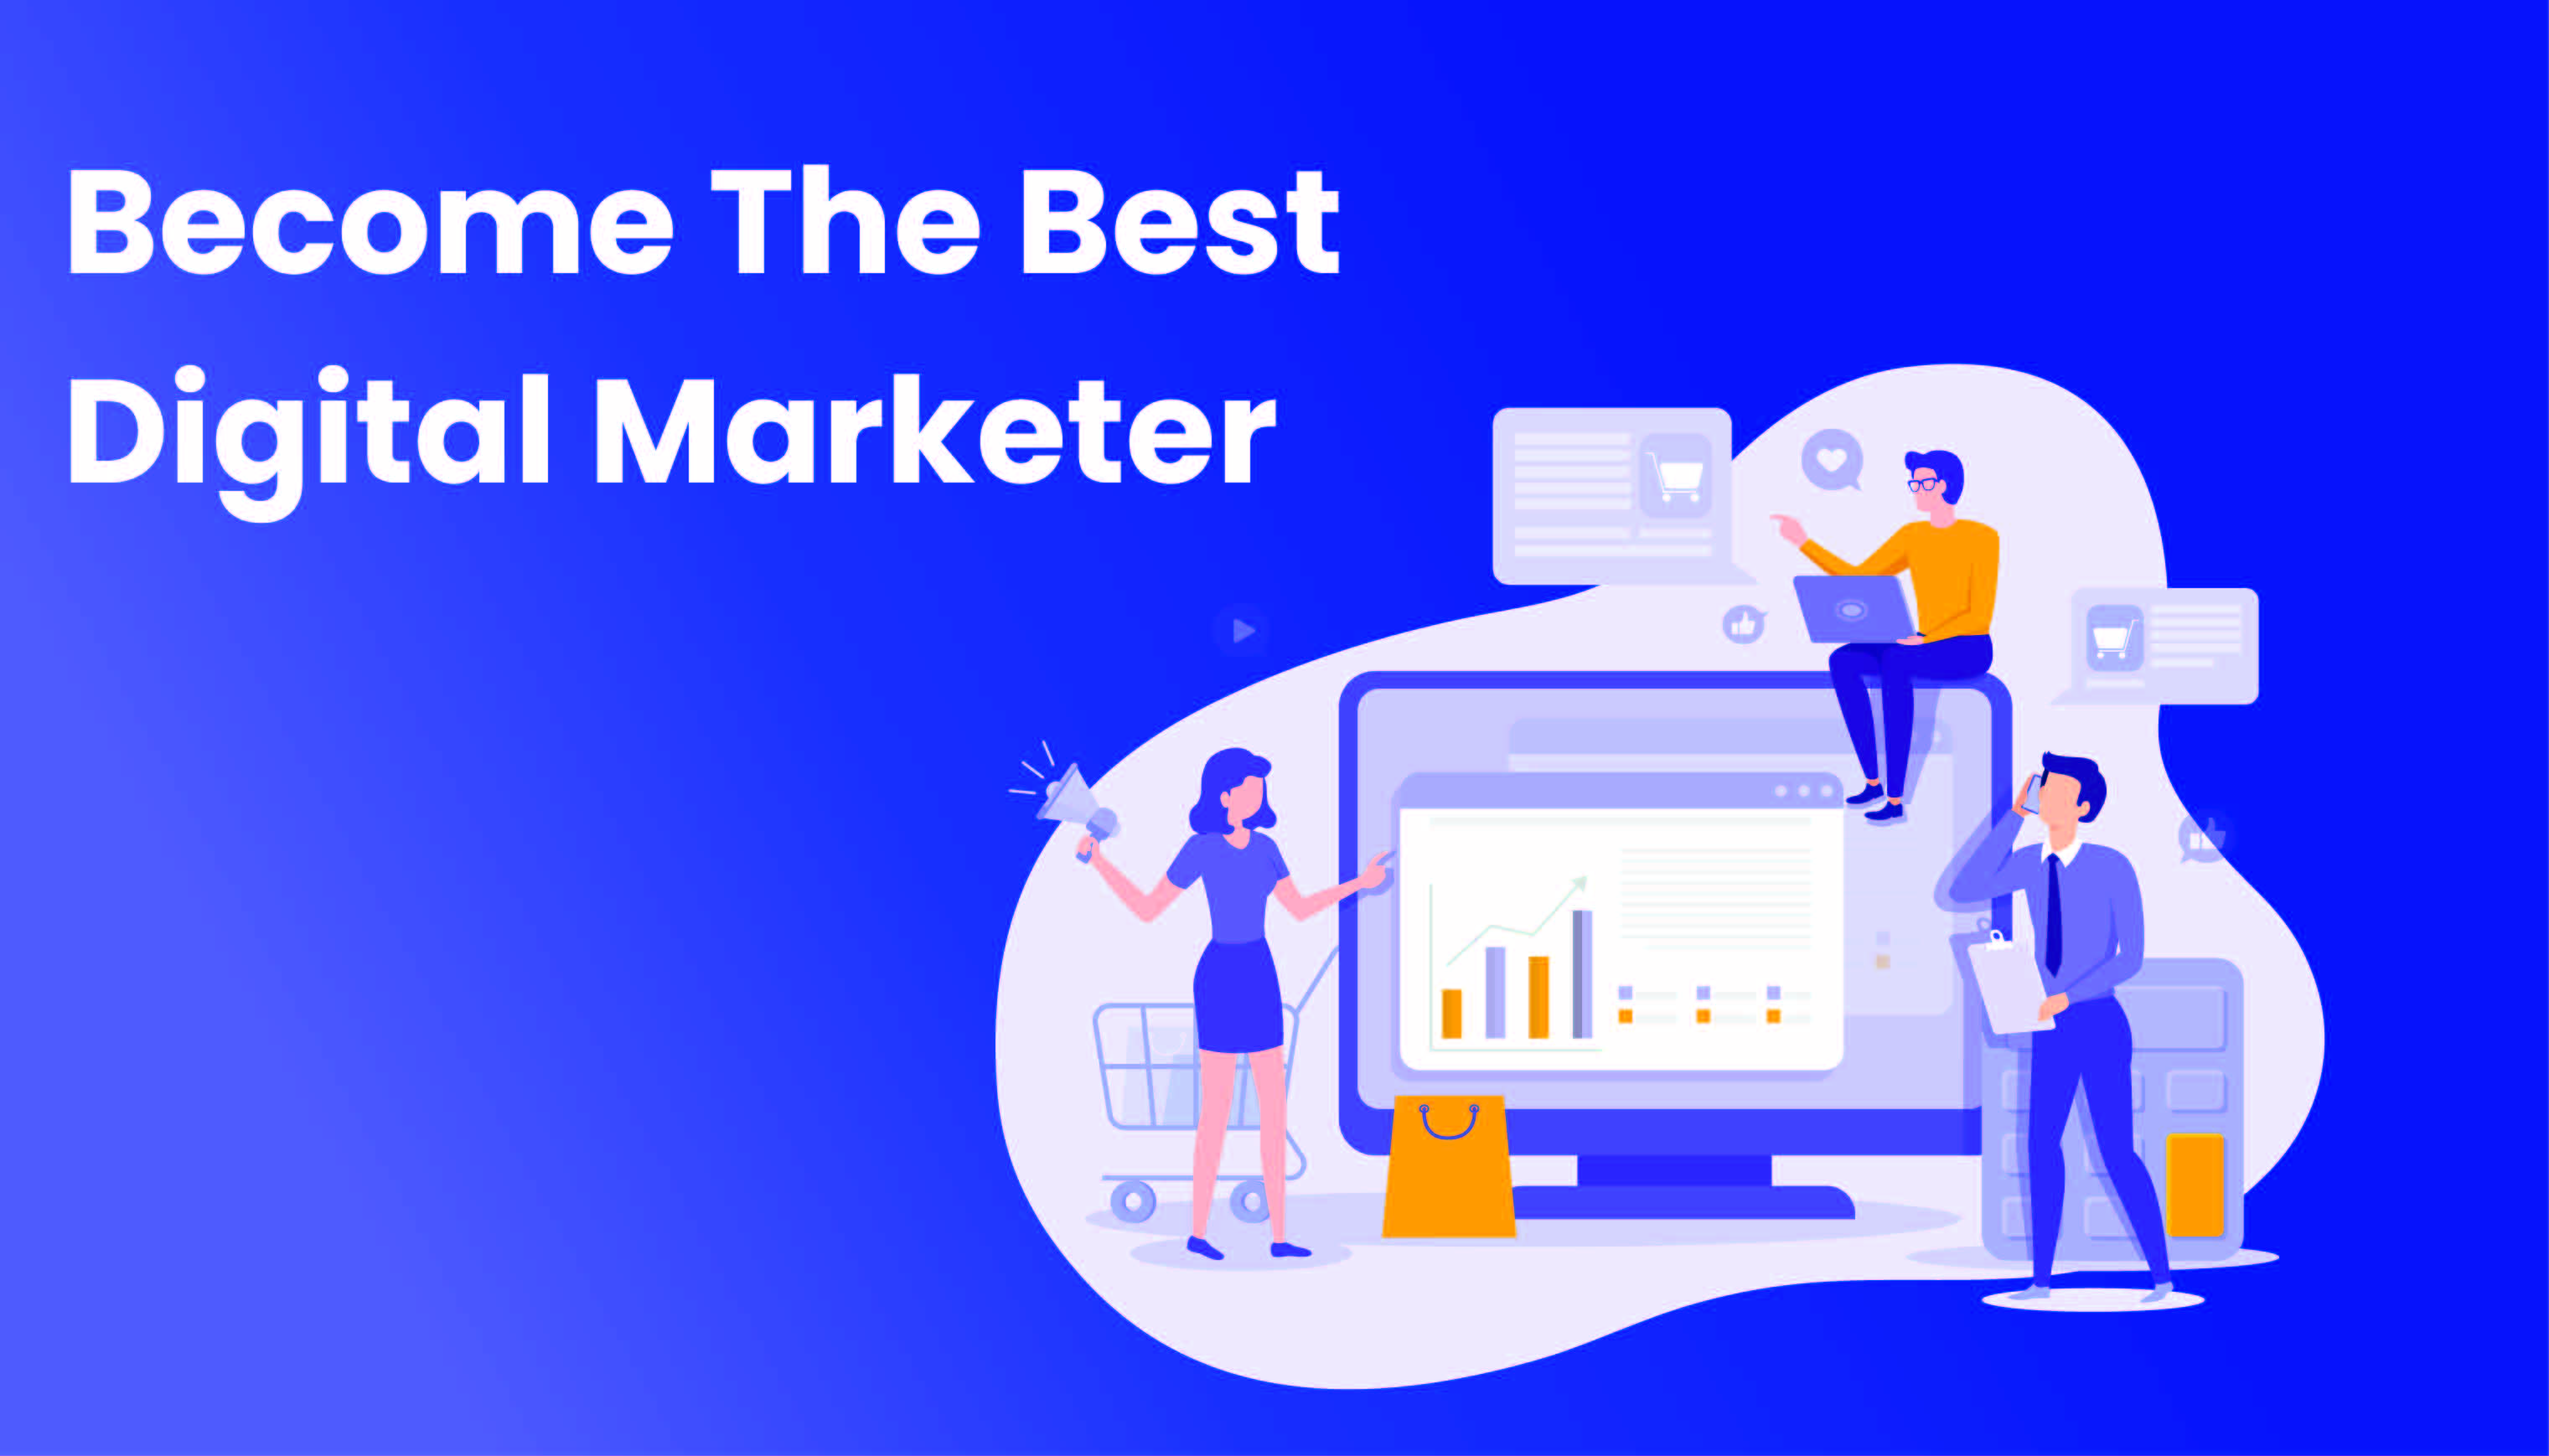 10 Ways To Become The Best Digital Marketer